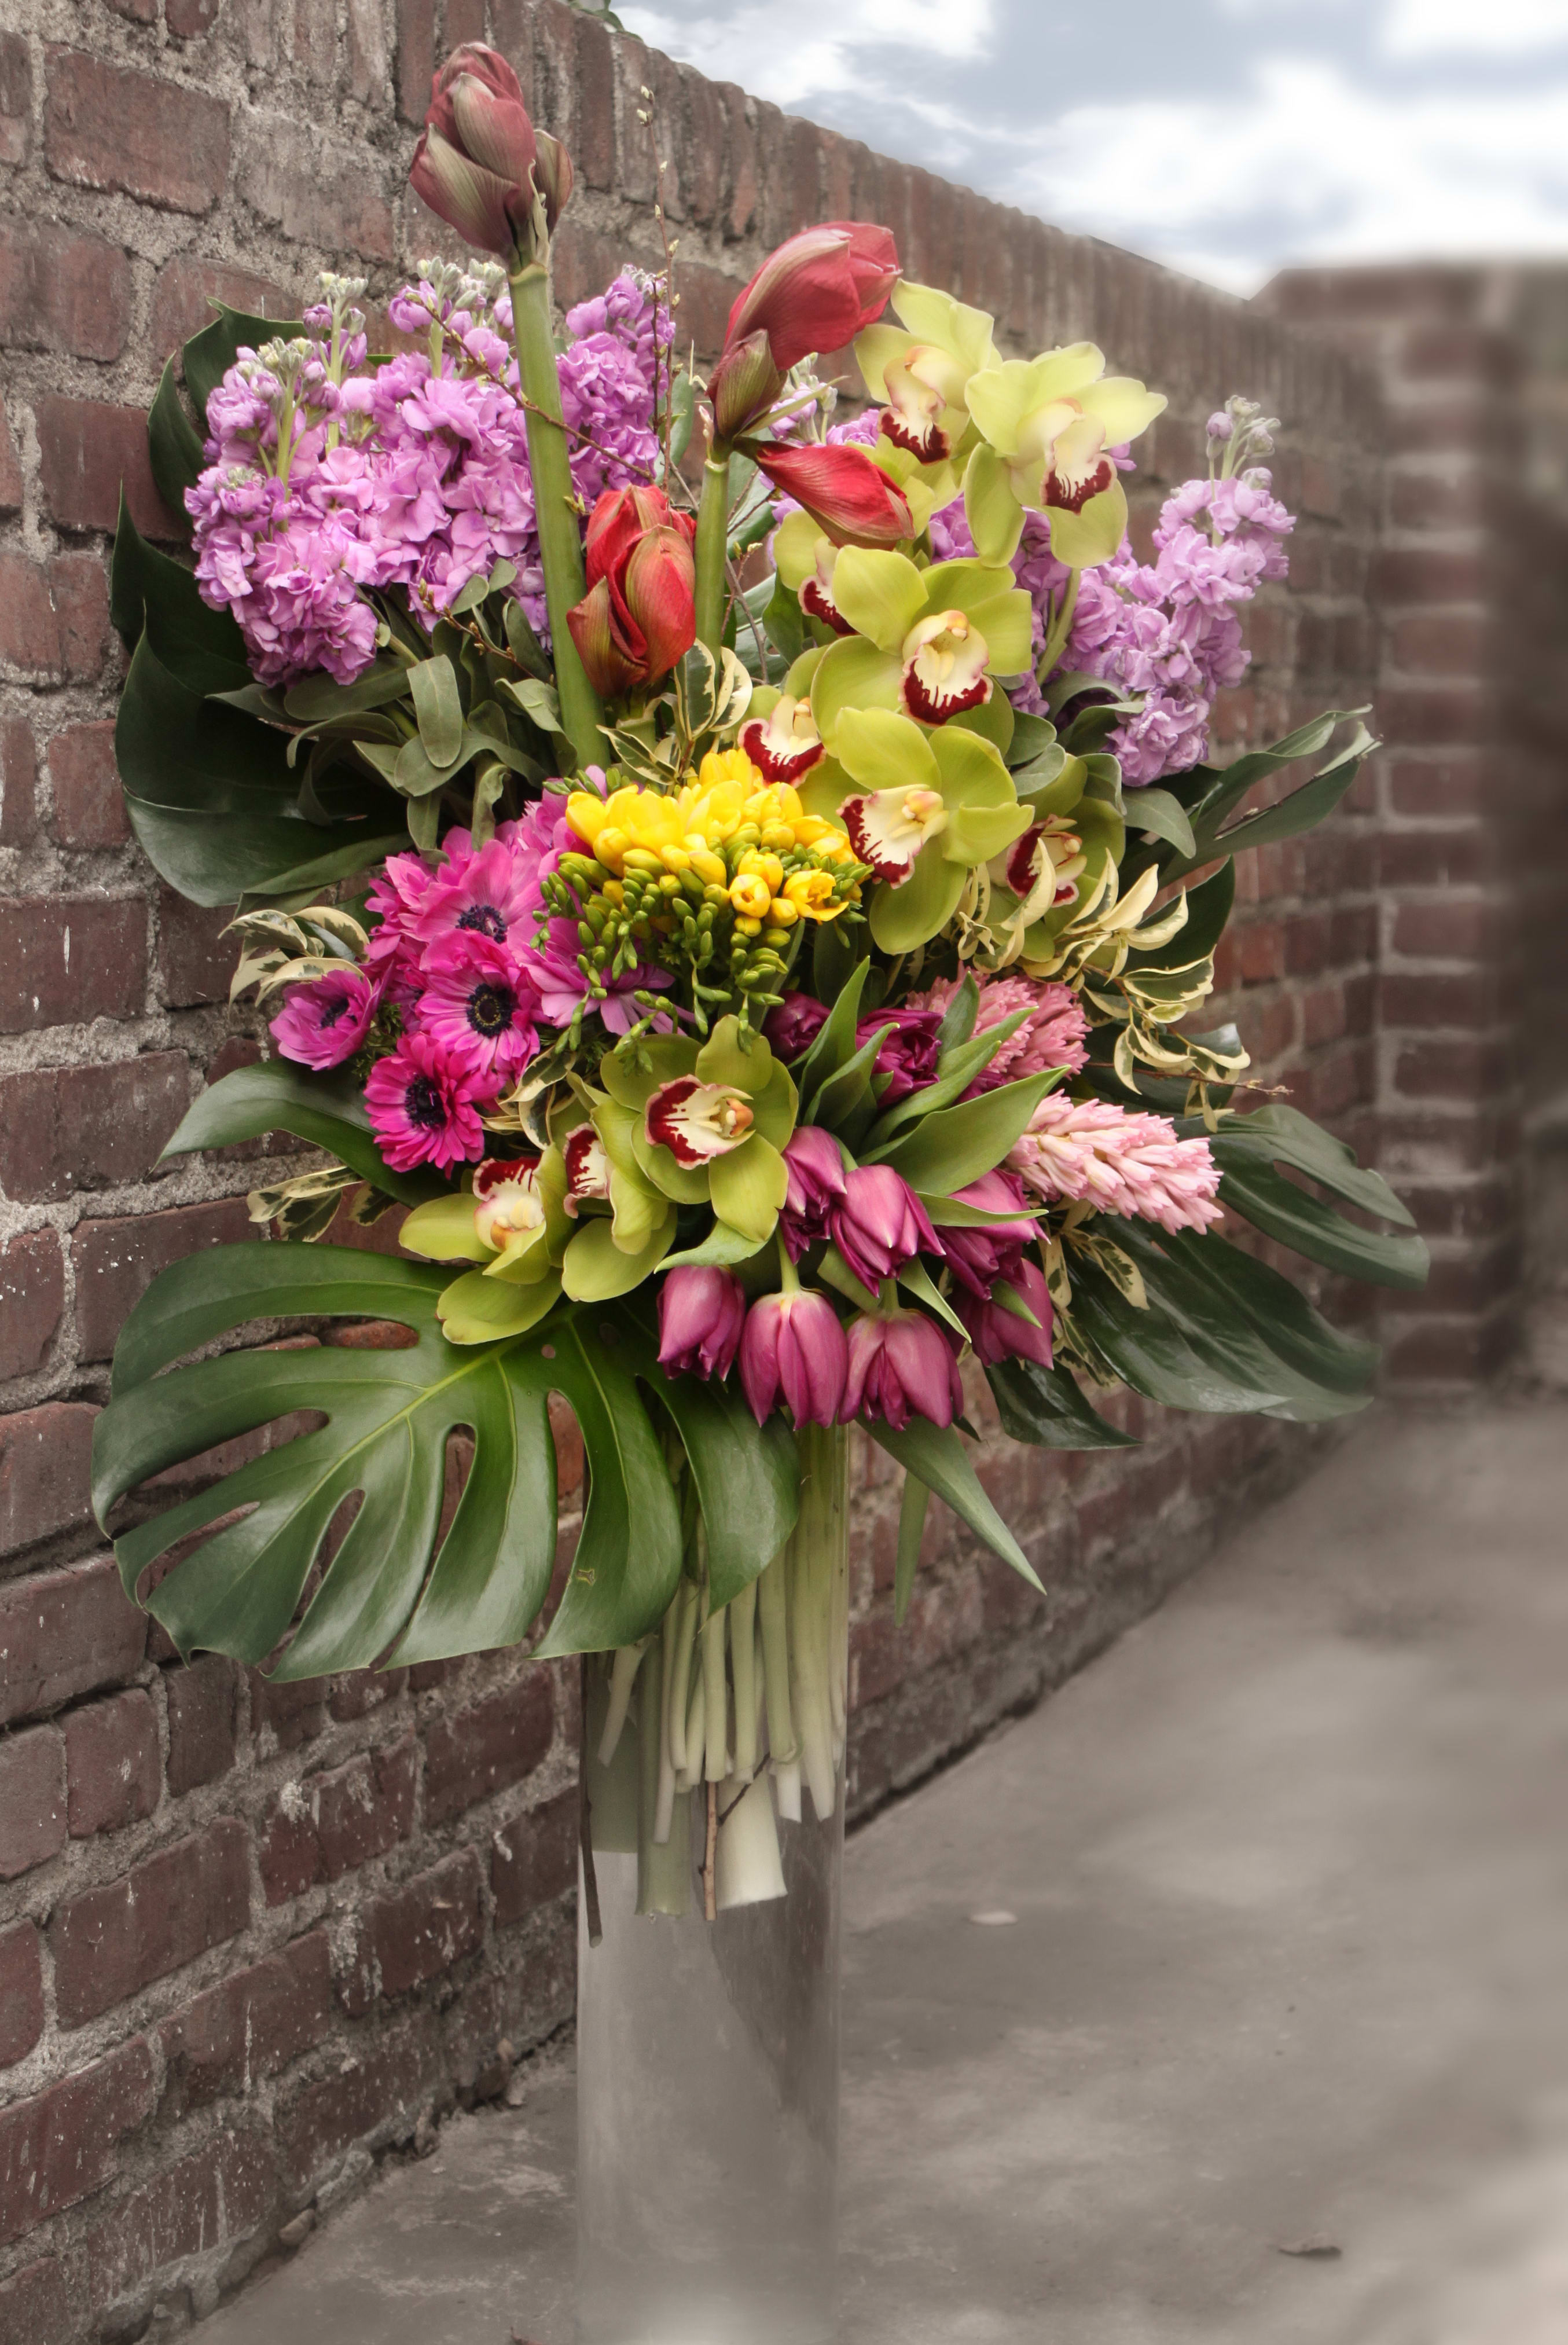 Explosion of Spring Colors - Extravegent arrangement of  Orchids, Amarillas, Tulips, Freesias and Anemonies in a glass vase. This grandiose design makes an amazing gift for Mother's Day, anniverseries, birthdays and other major events. Approx. 40&quot; Tall X 20&quot; Wide